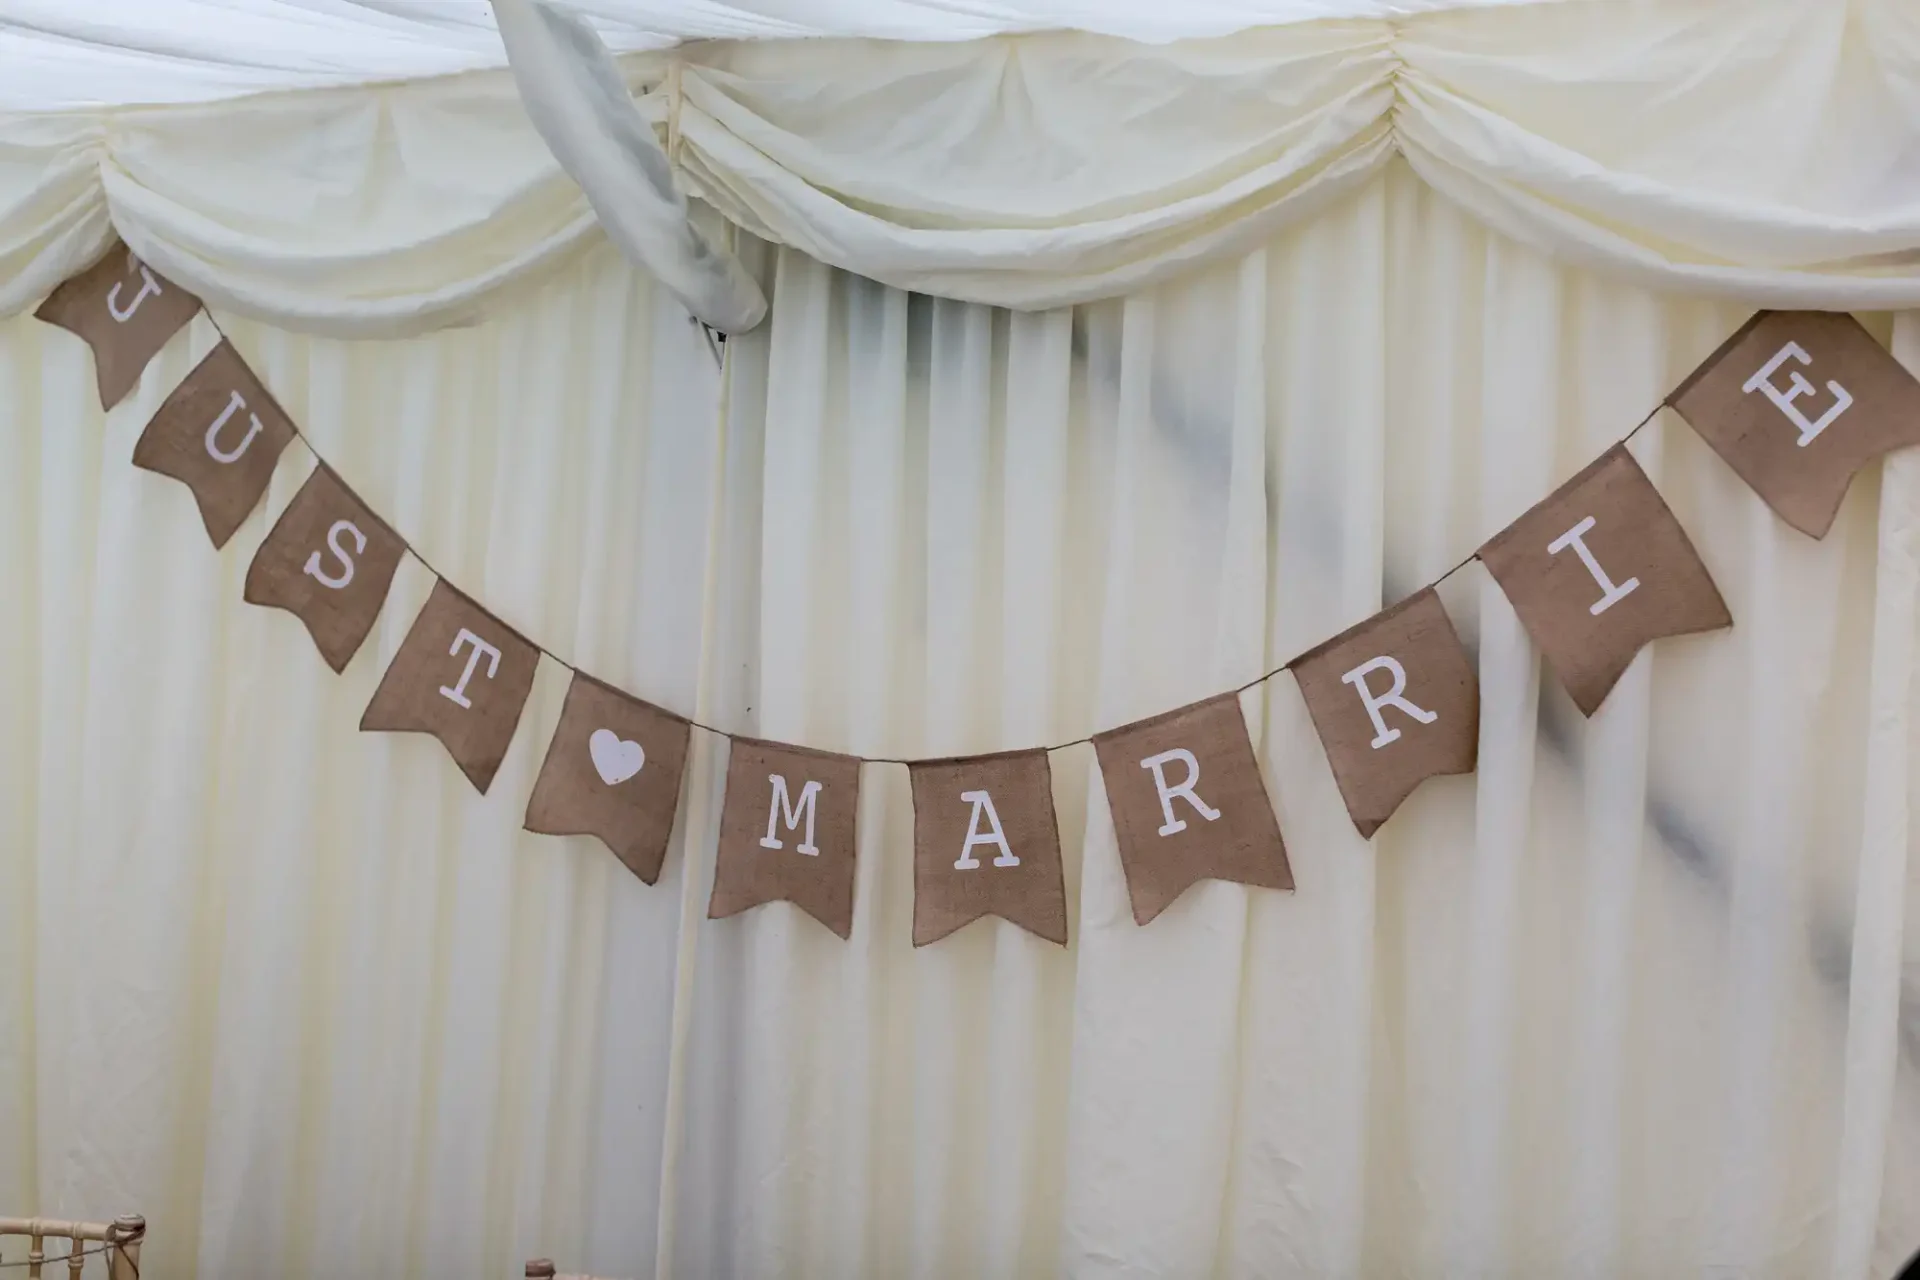 A burlap banner with the words "just married" hanging inside a white tent with draped linens.